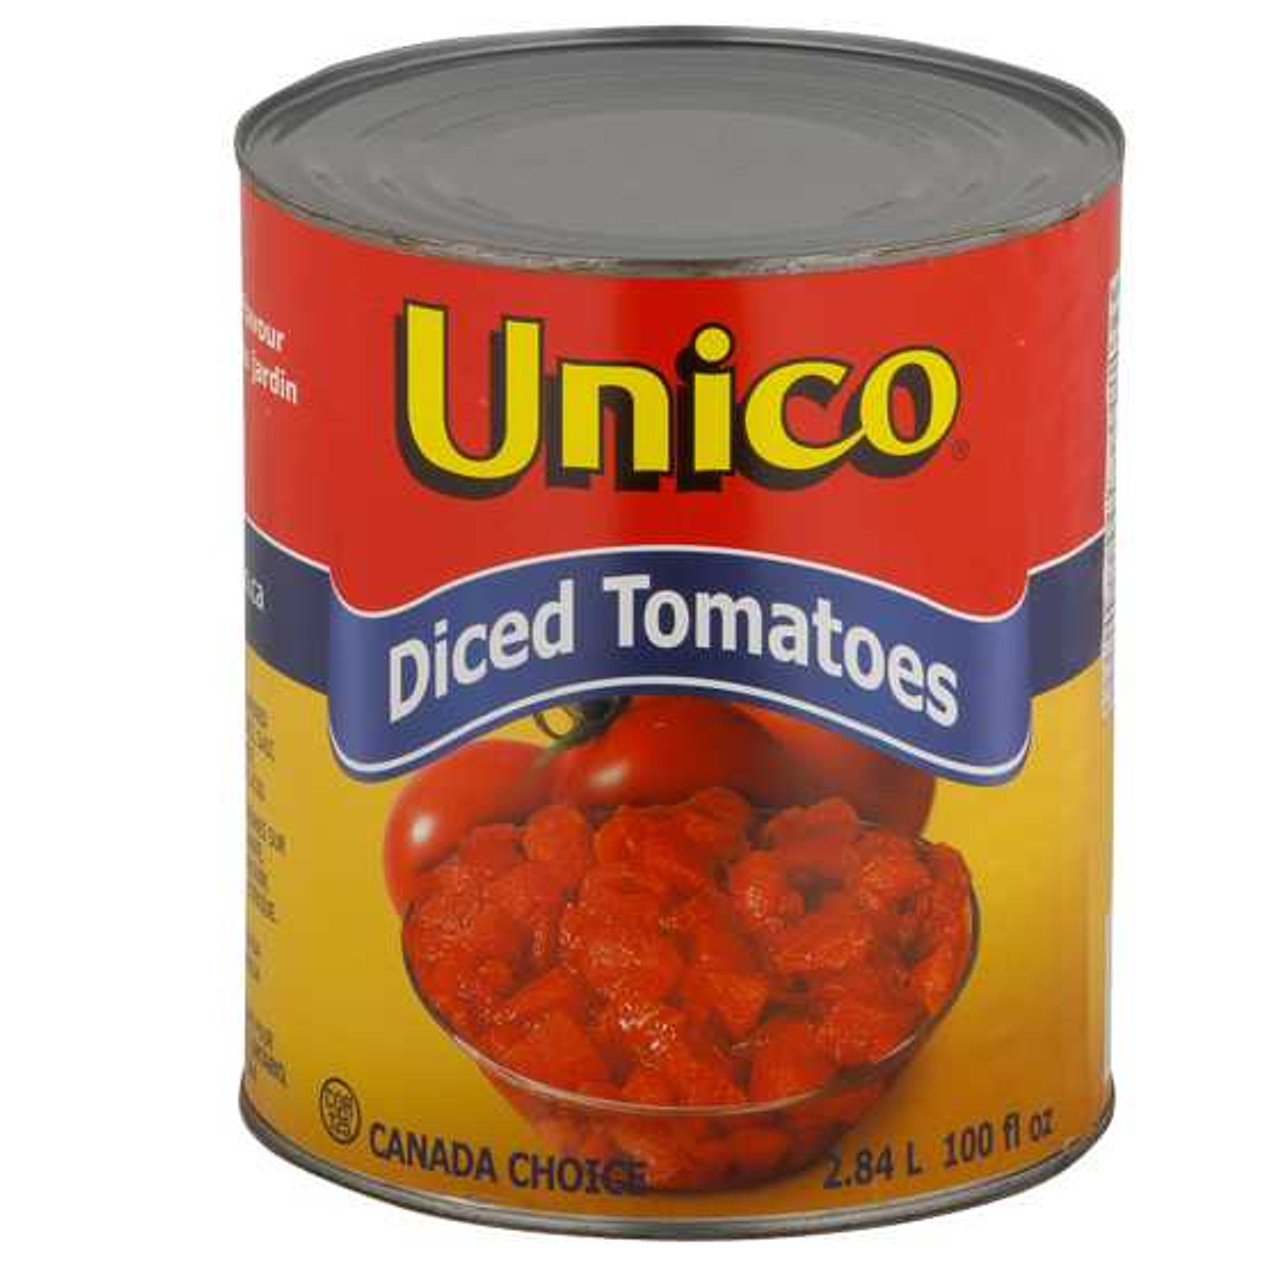 UNICO Diced Tomatoes, Club Pack 2.84Litre UNICO Chicken Pieces